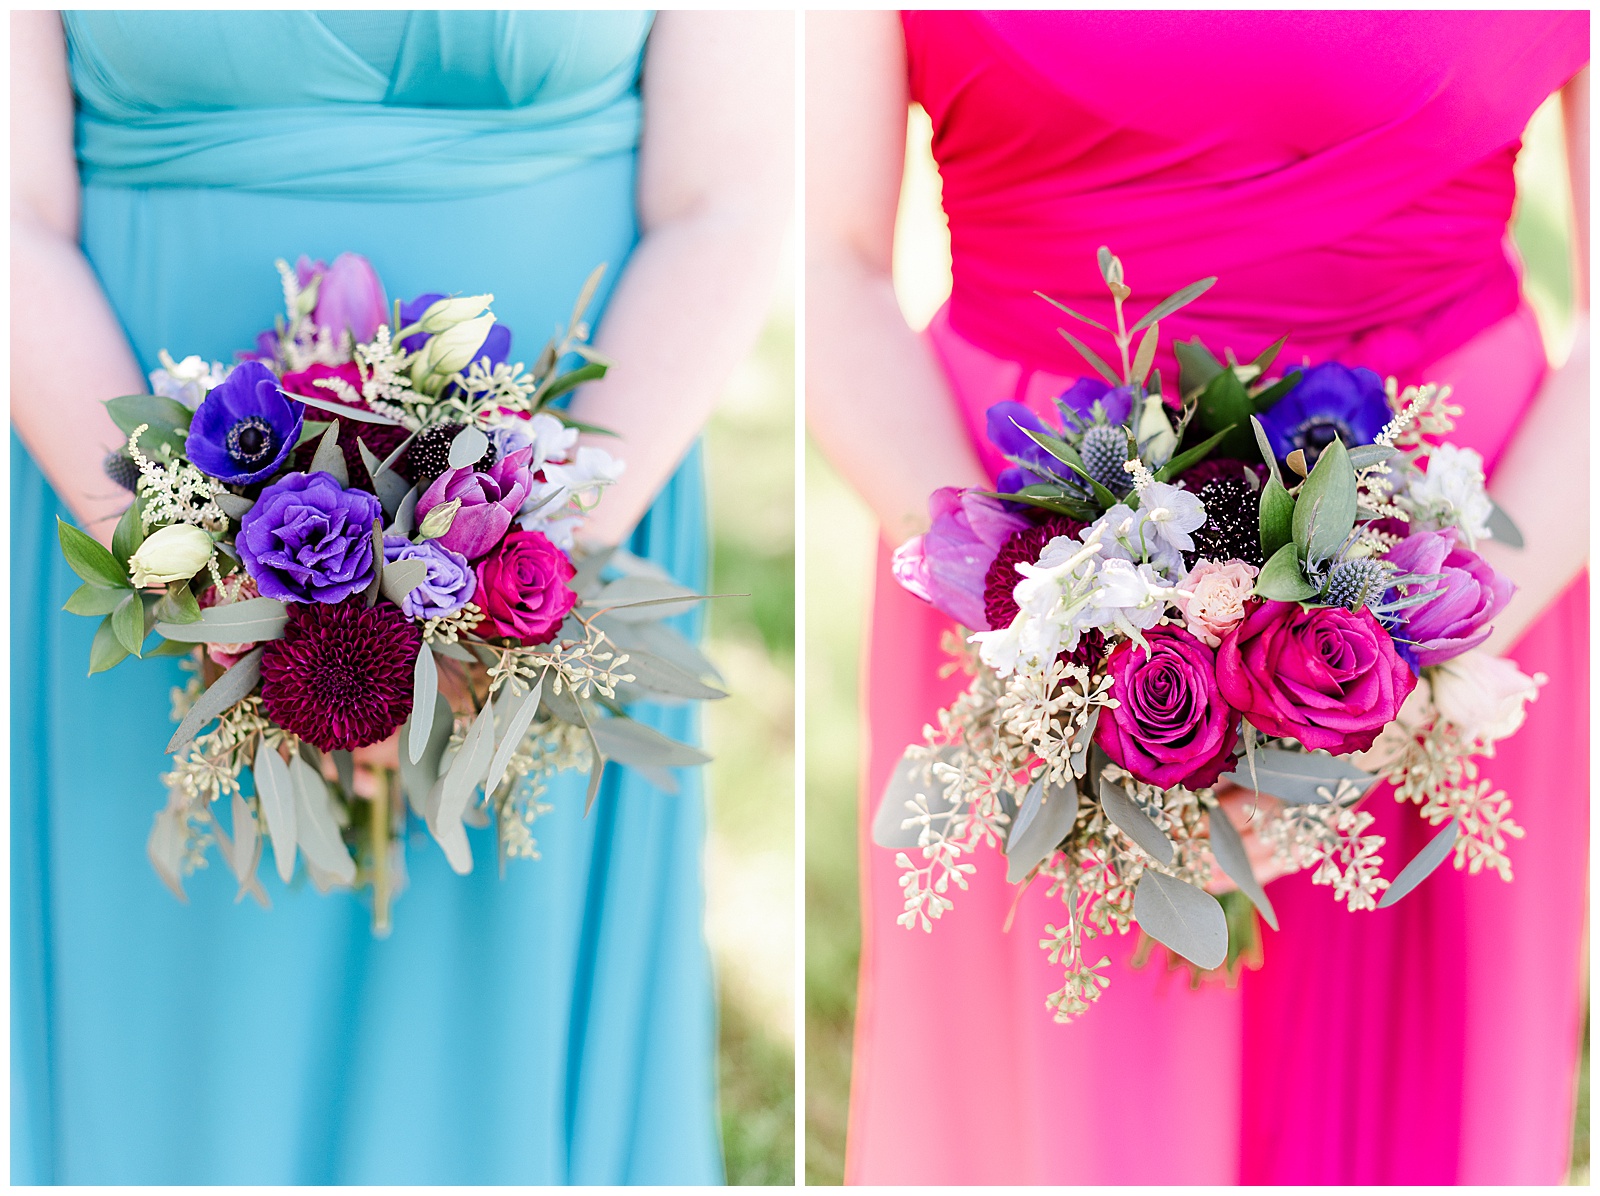 💍 bold pink and blue color bridesmaid dresses and pink and purple bouquet detail shot 👰 Bride: lace wedding dress with rhinestone belt rhinestone barrette in hair down with pearls 💍 Bright Colorful Summer City Wedding in Charlotte, NC with Taryn and Ryan | Kevyn Dixon Photography